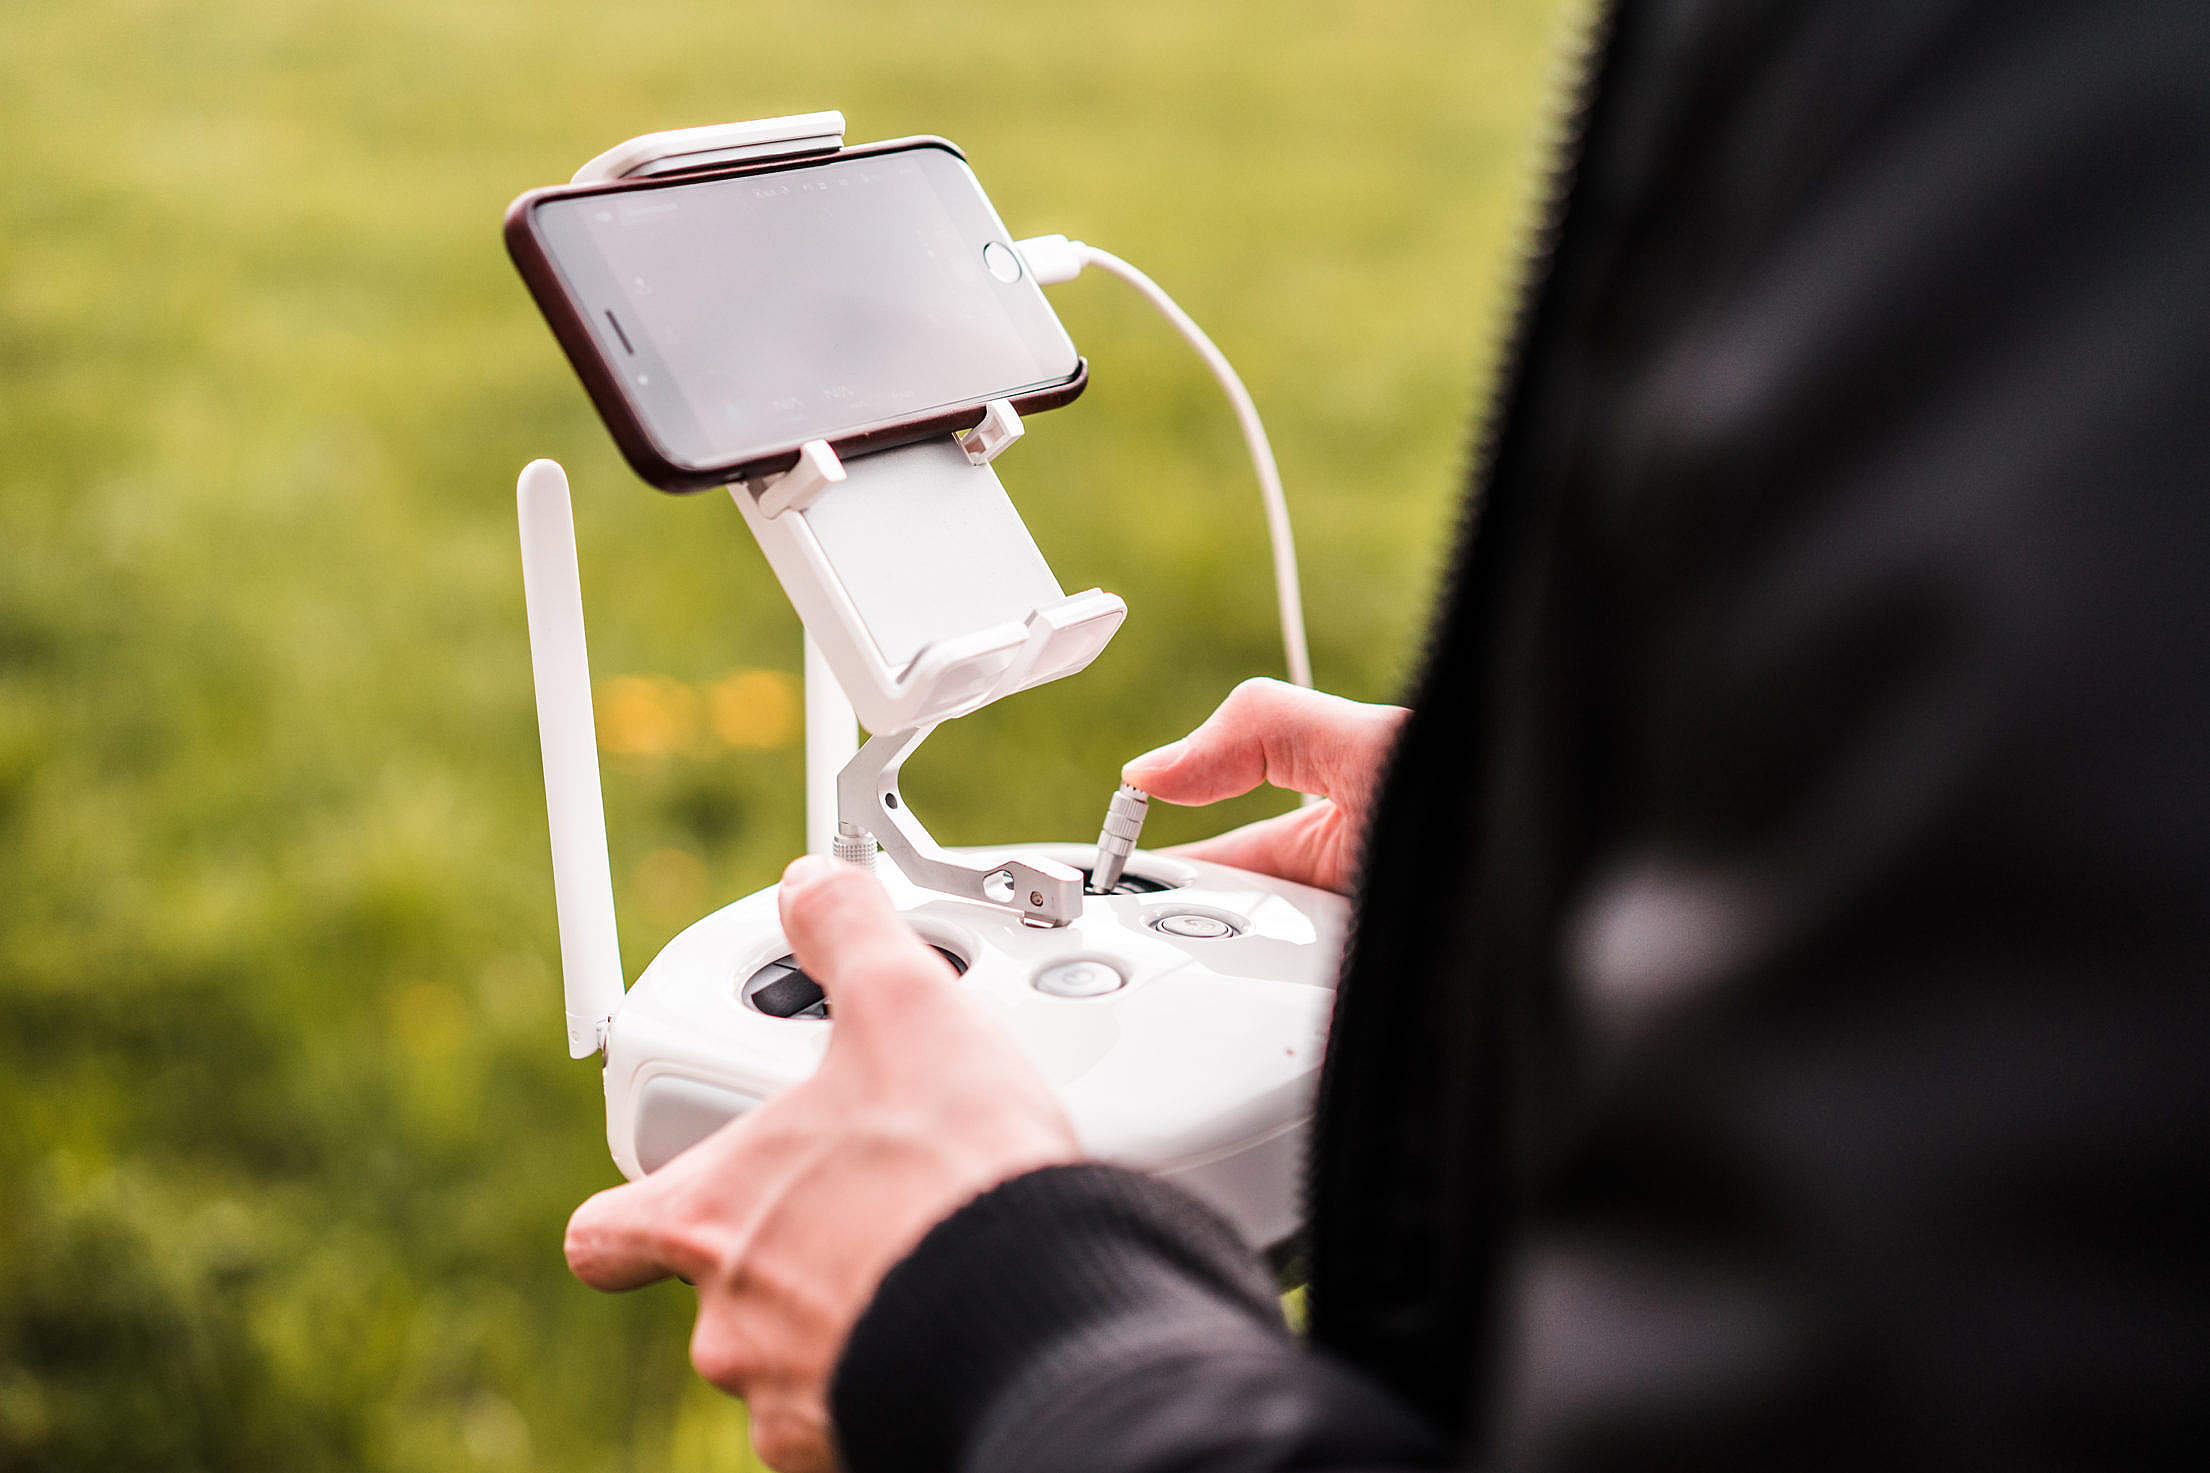 Male Pilot Controlling FPV Drone with Smarphone #2 Free Stock Photo